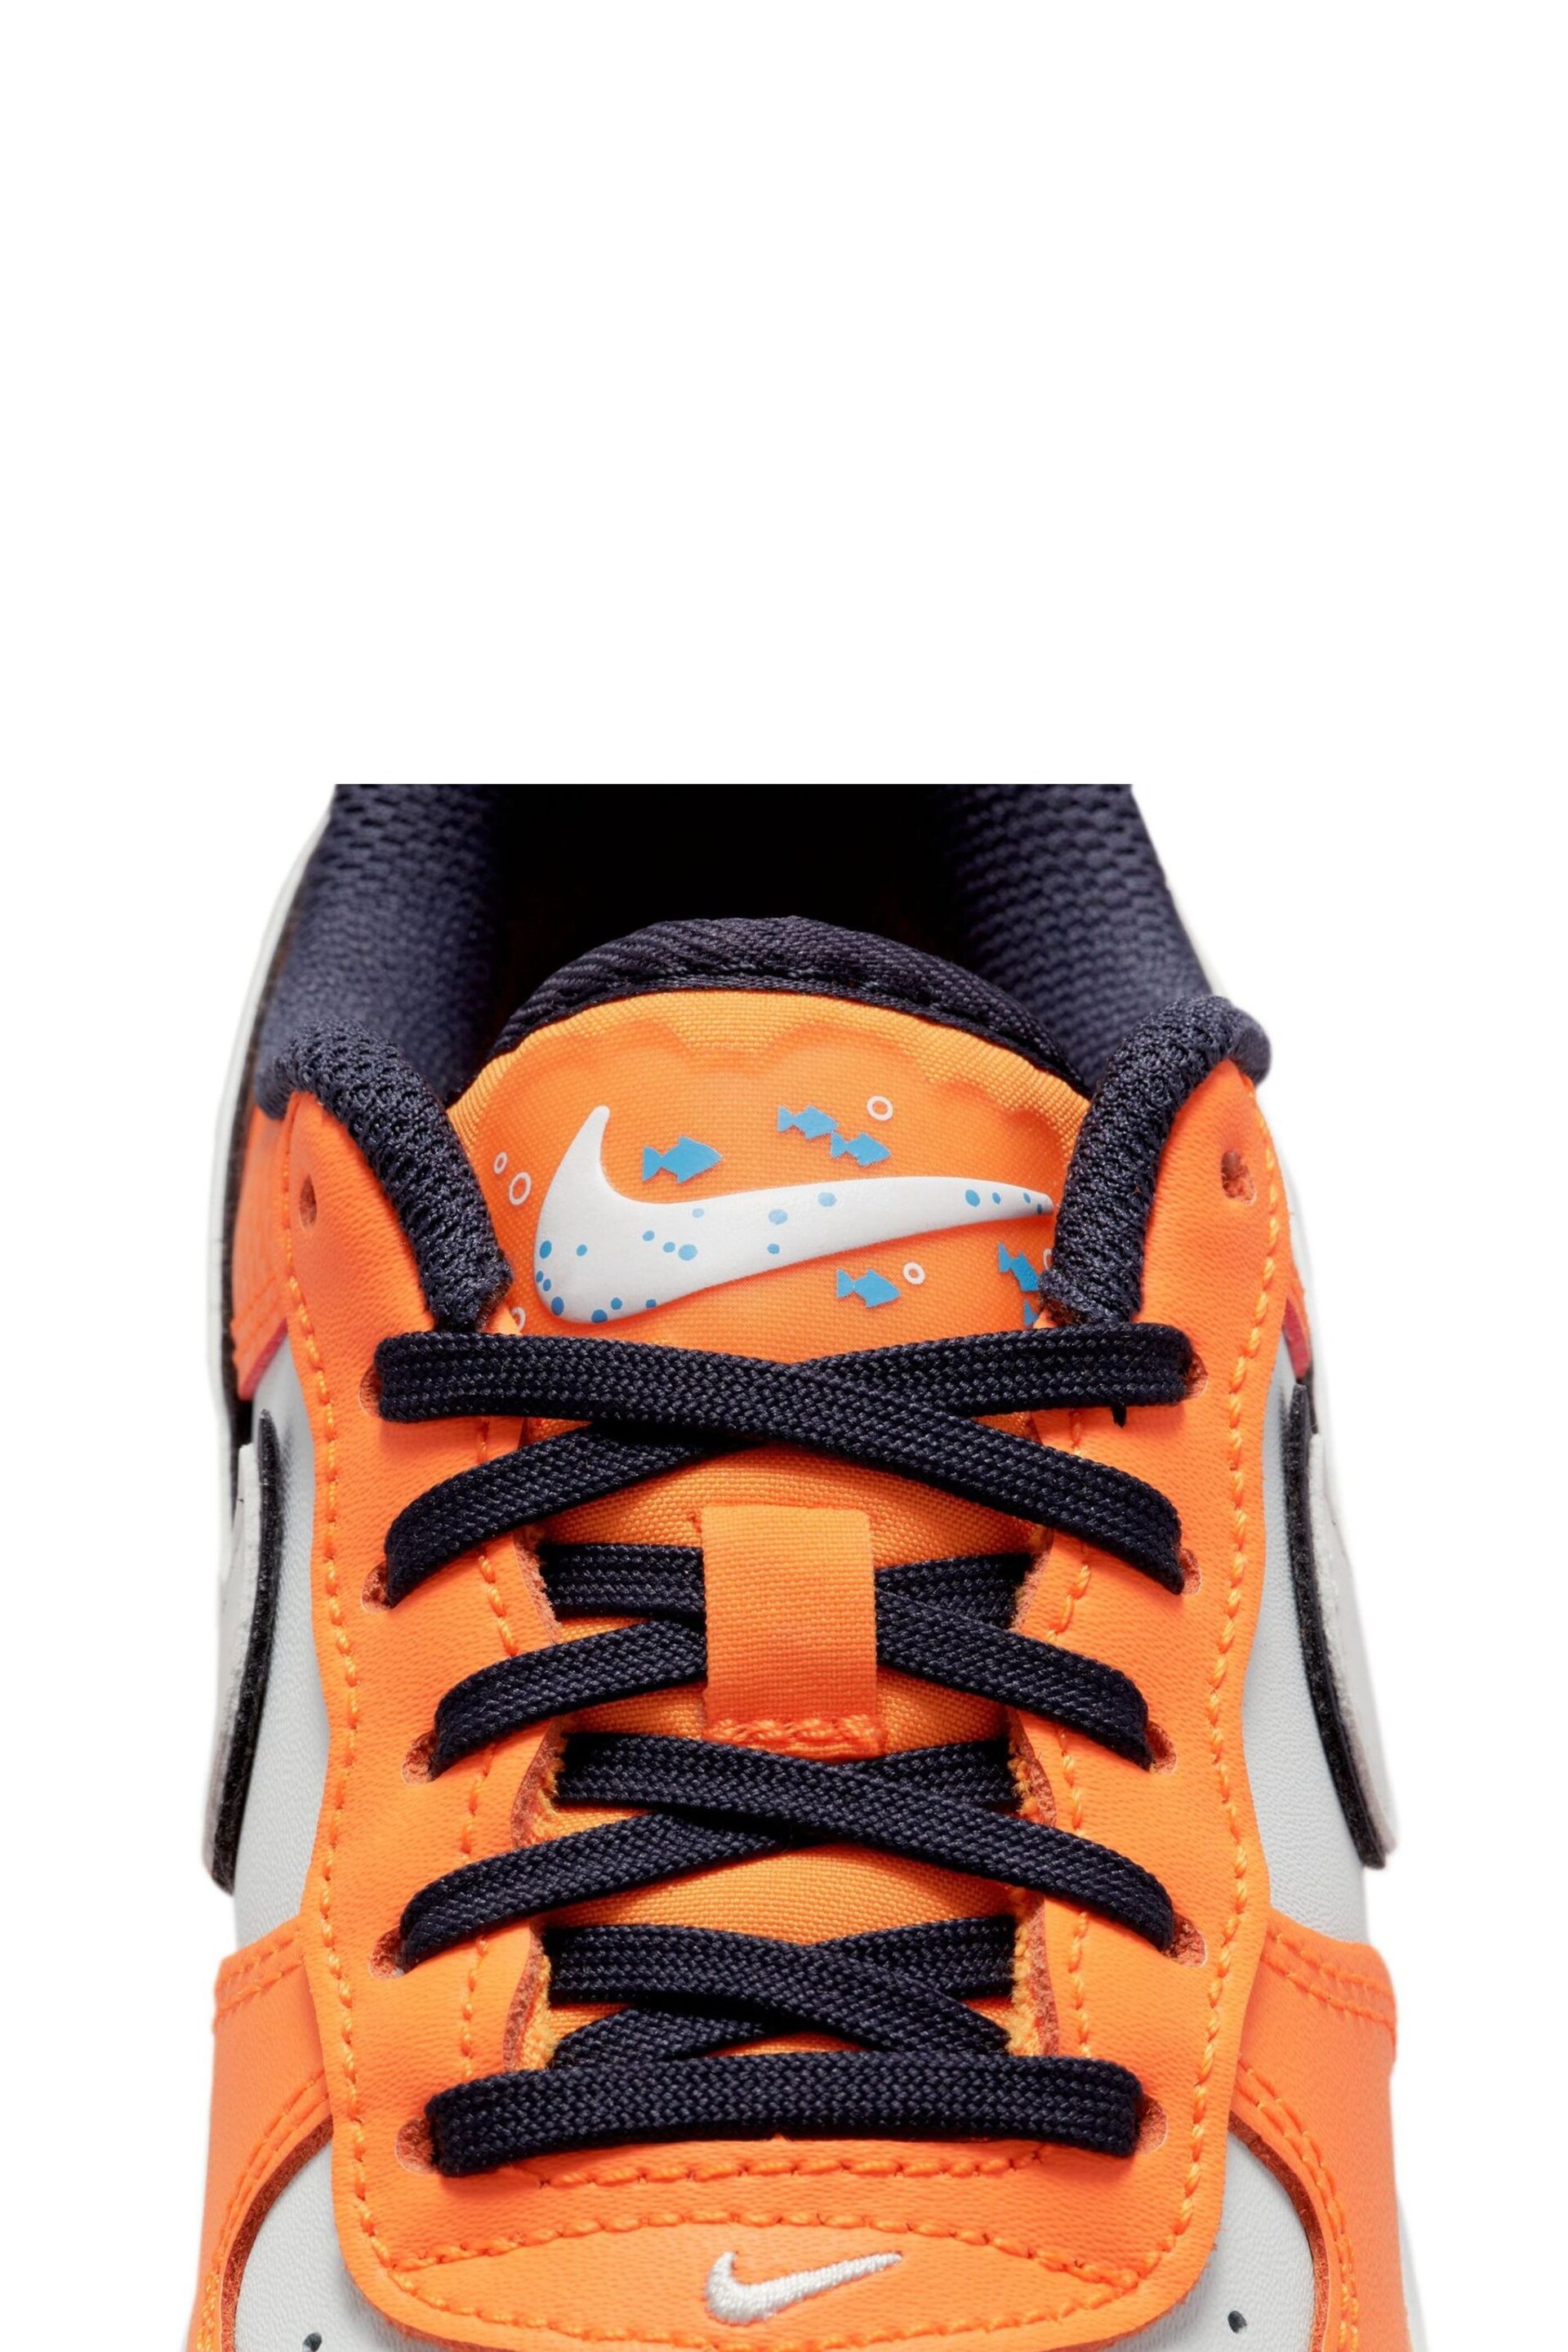 Nike Orange Force 1 Low Junior Trainers - Image 10 of 11